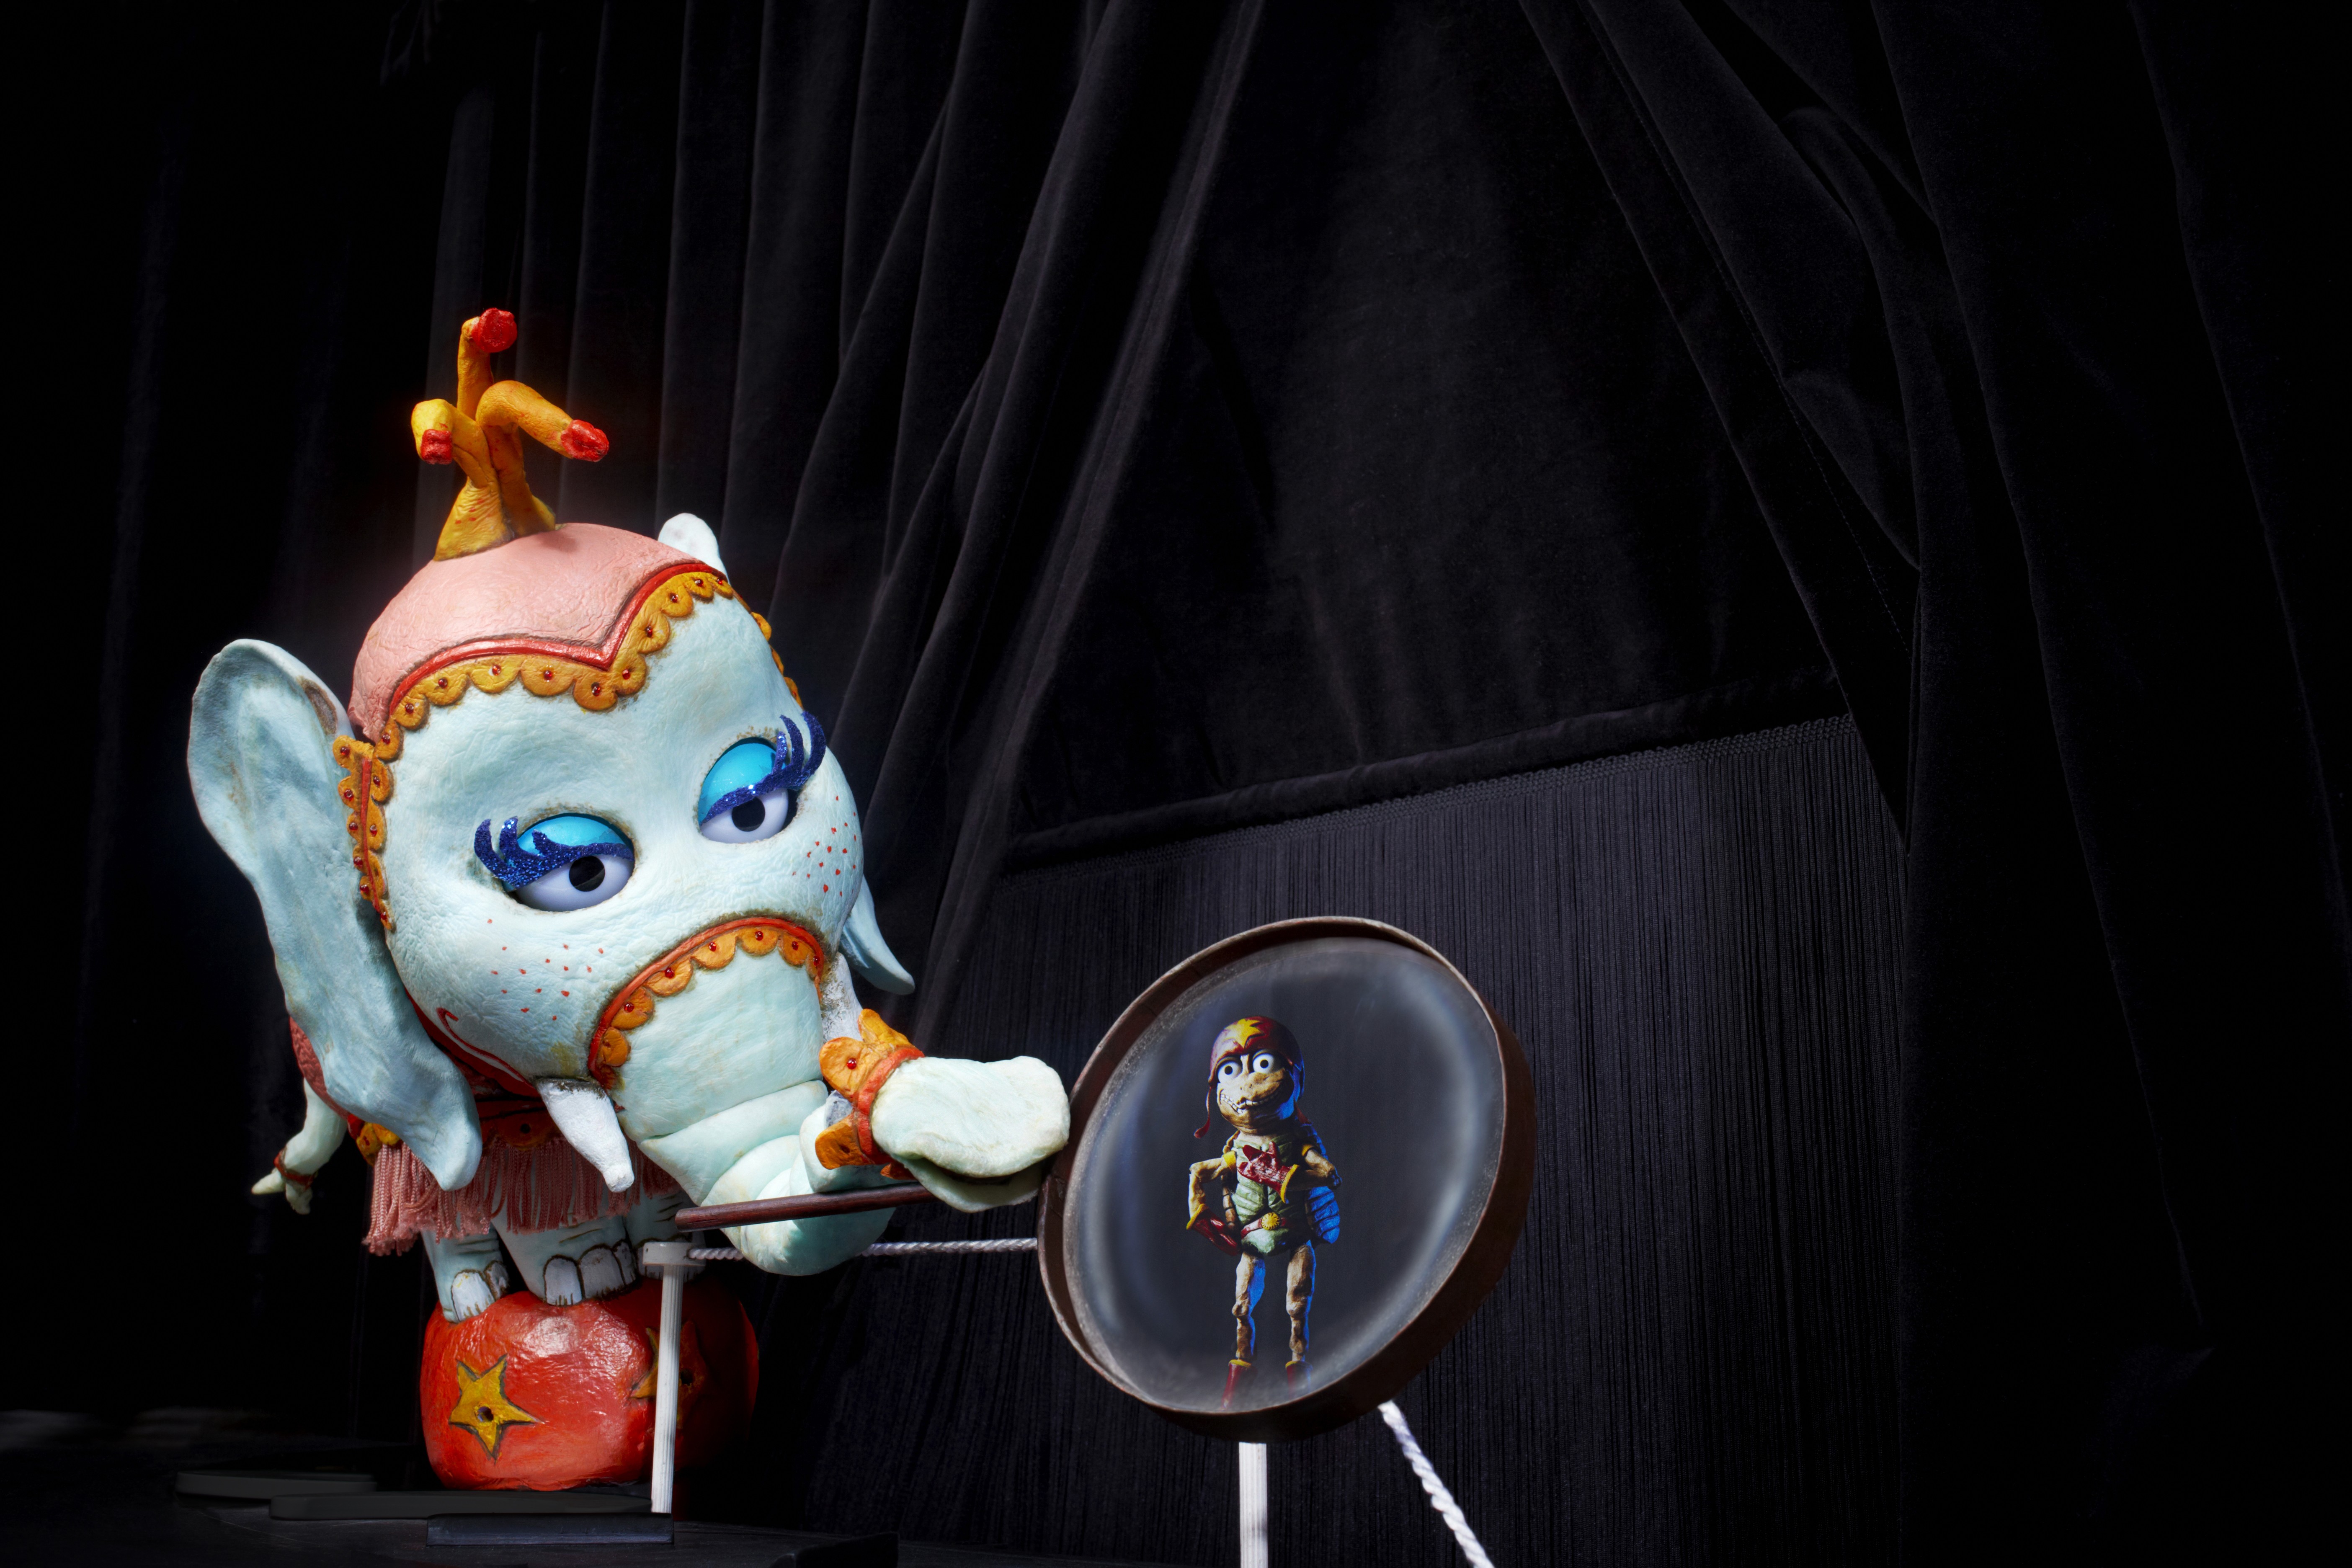 The ‘apocalyptic love comedy’, ‘Circus Funestus’ – featuring microscopic hero, Mr Flea, who sparks a good-versus-evil battle declaring his love for a circus elephant – will be performed by Sofie Krug Teater in September as part of Hong Kong's ‘From Puppets to Humans’ Series